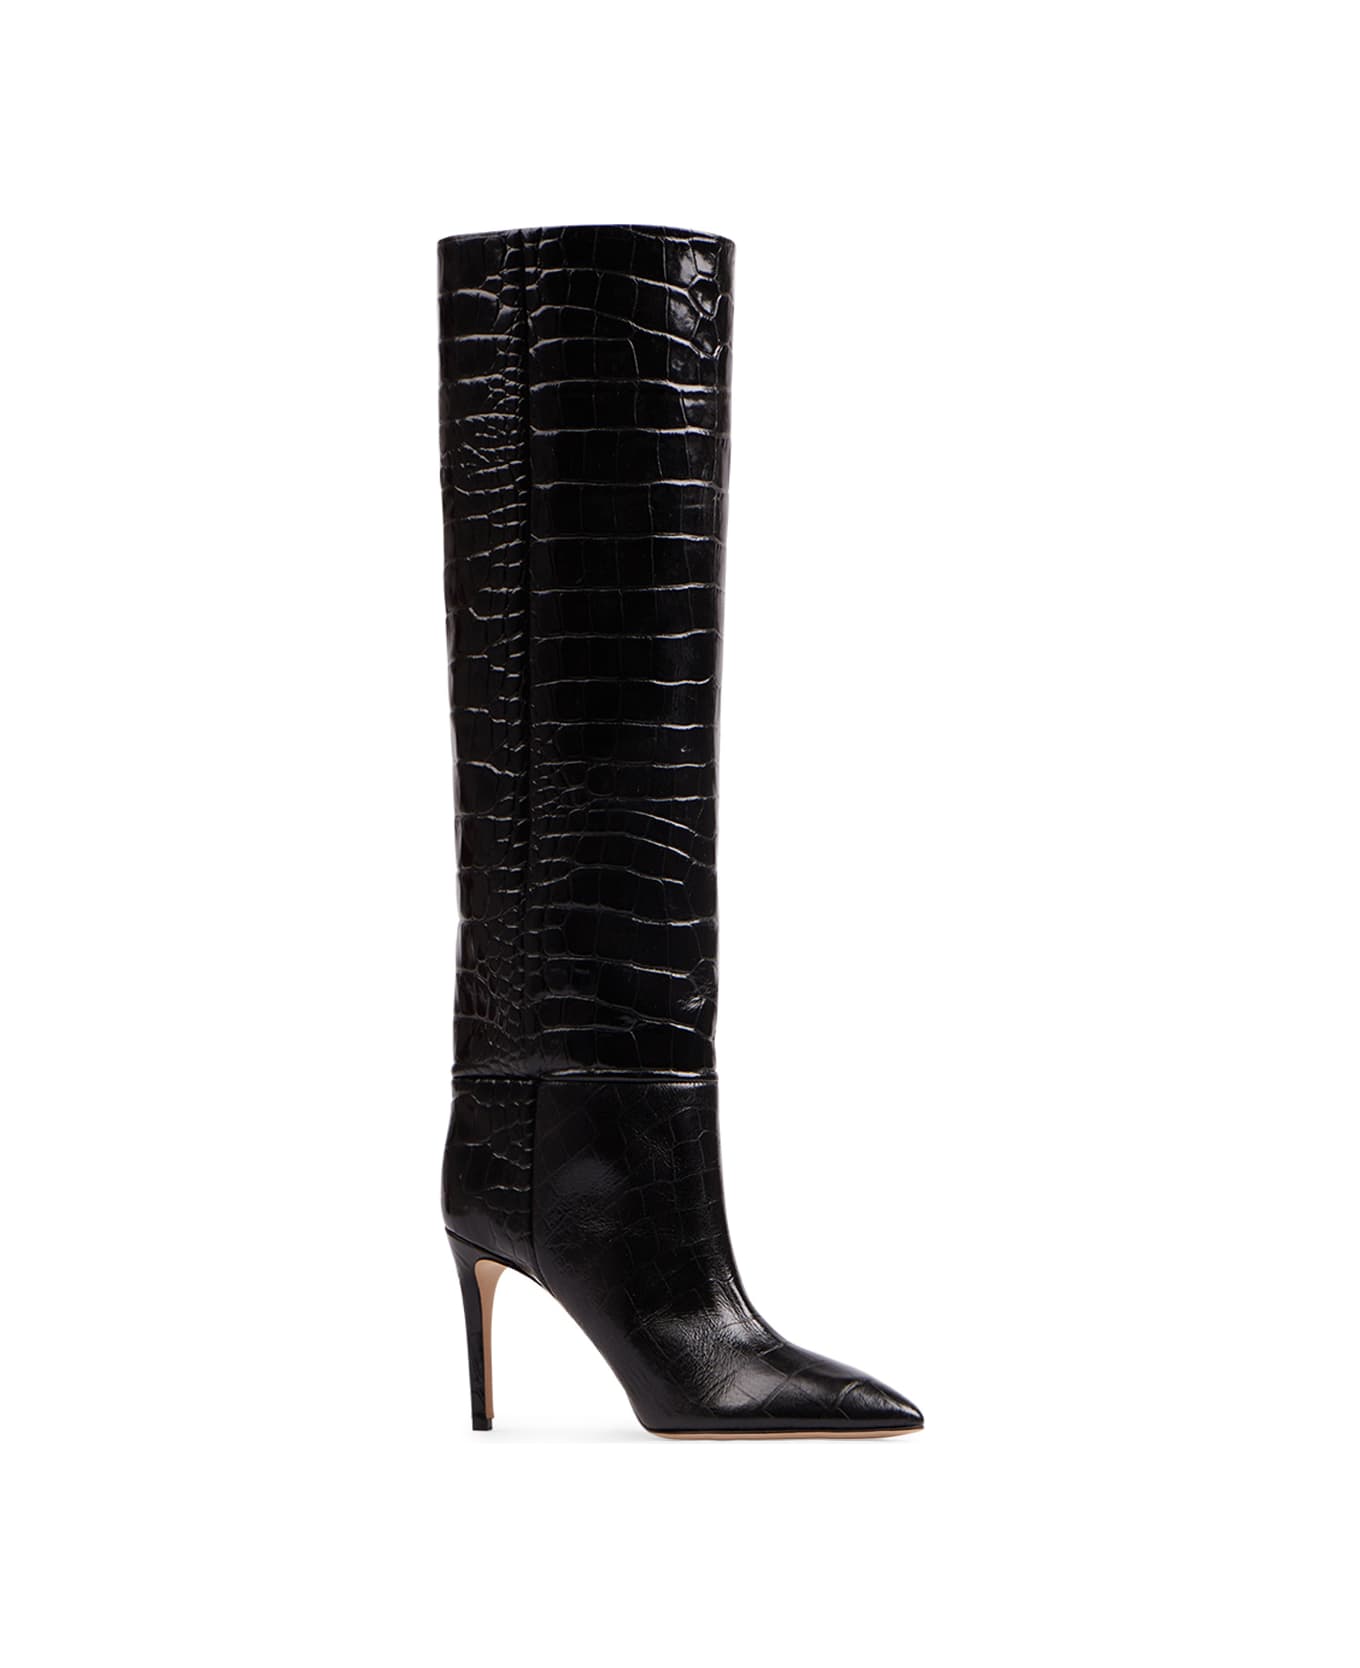 Paris Texas Charcoal Leather Stiletto Boots With Crocodile Print - Carbone